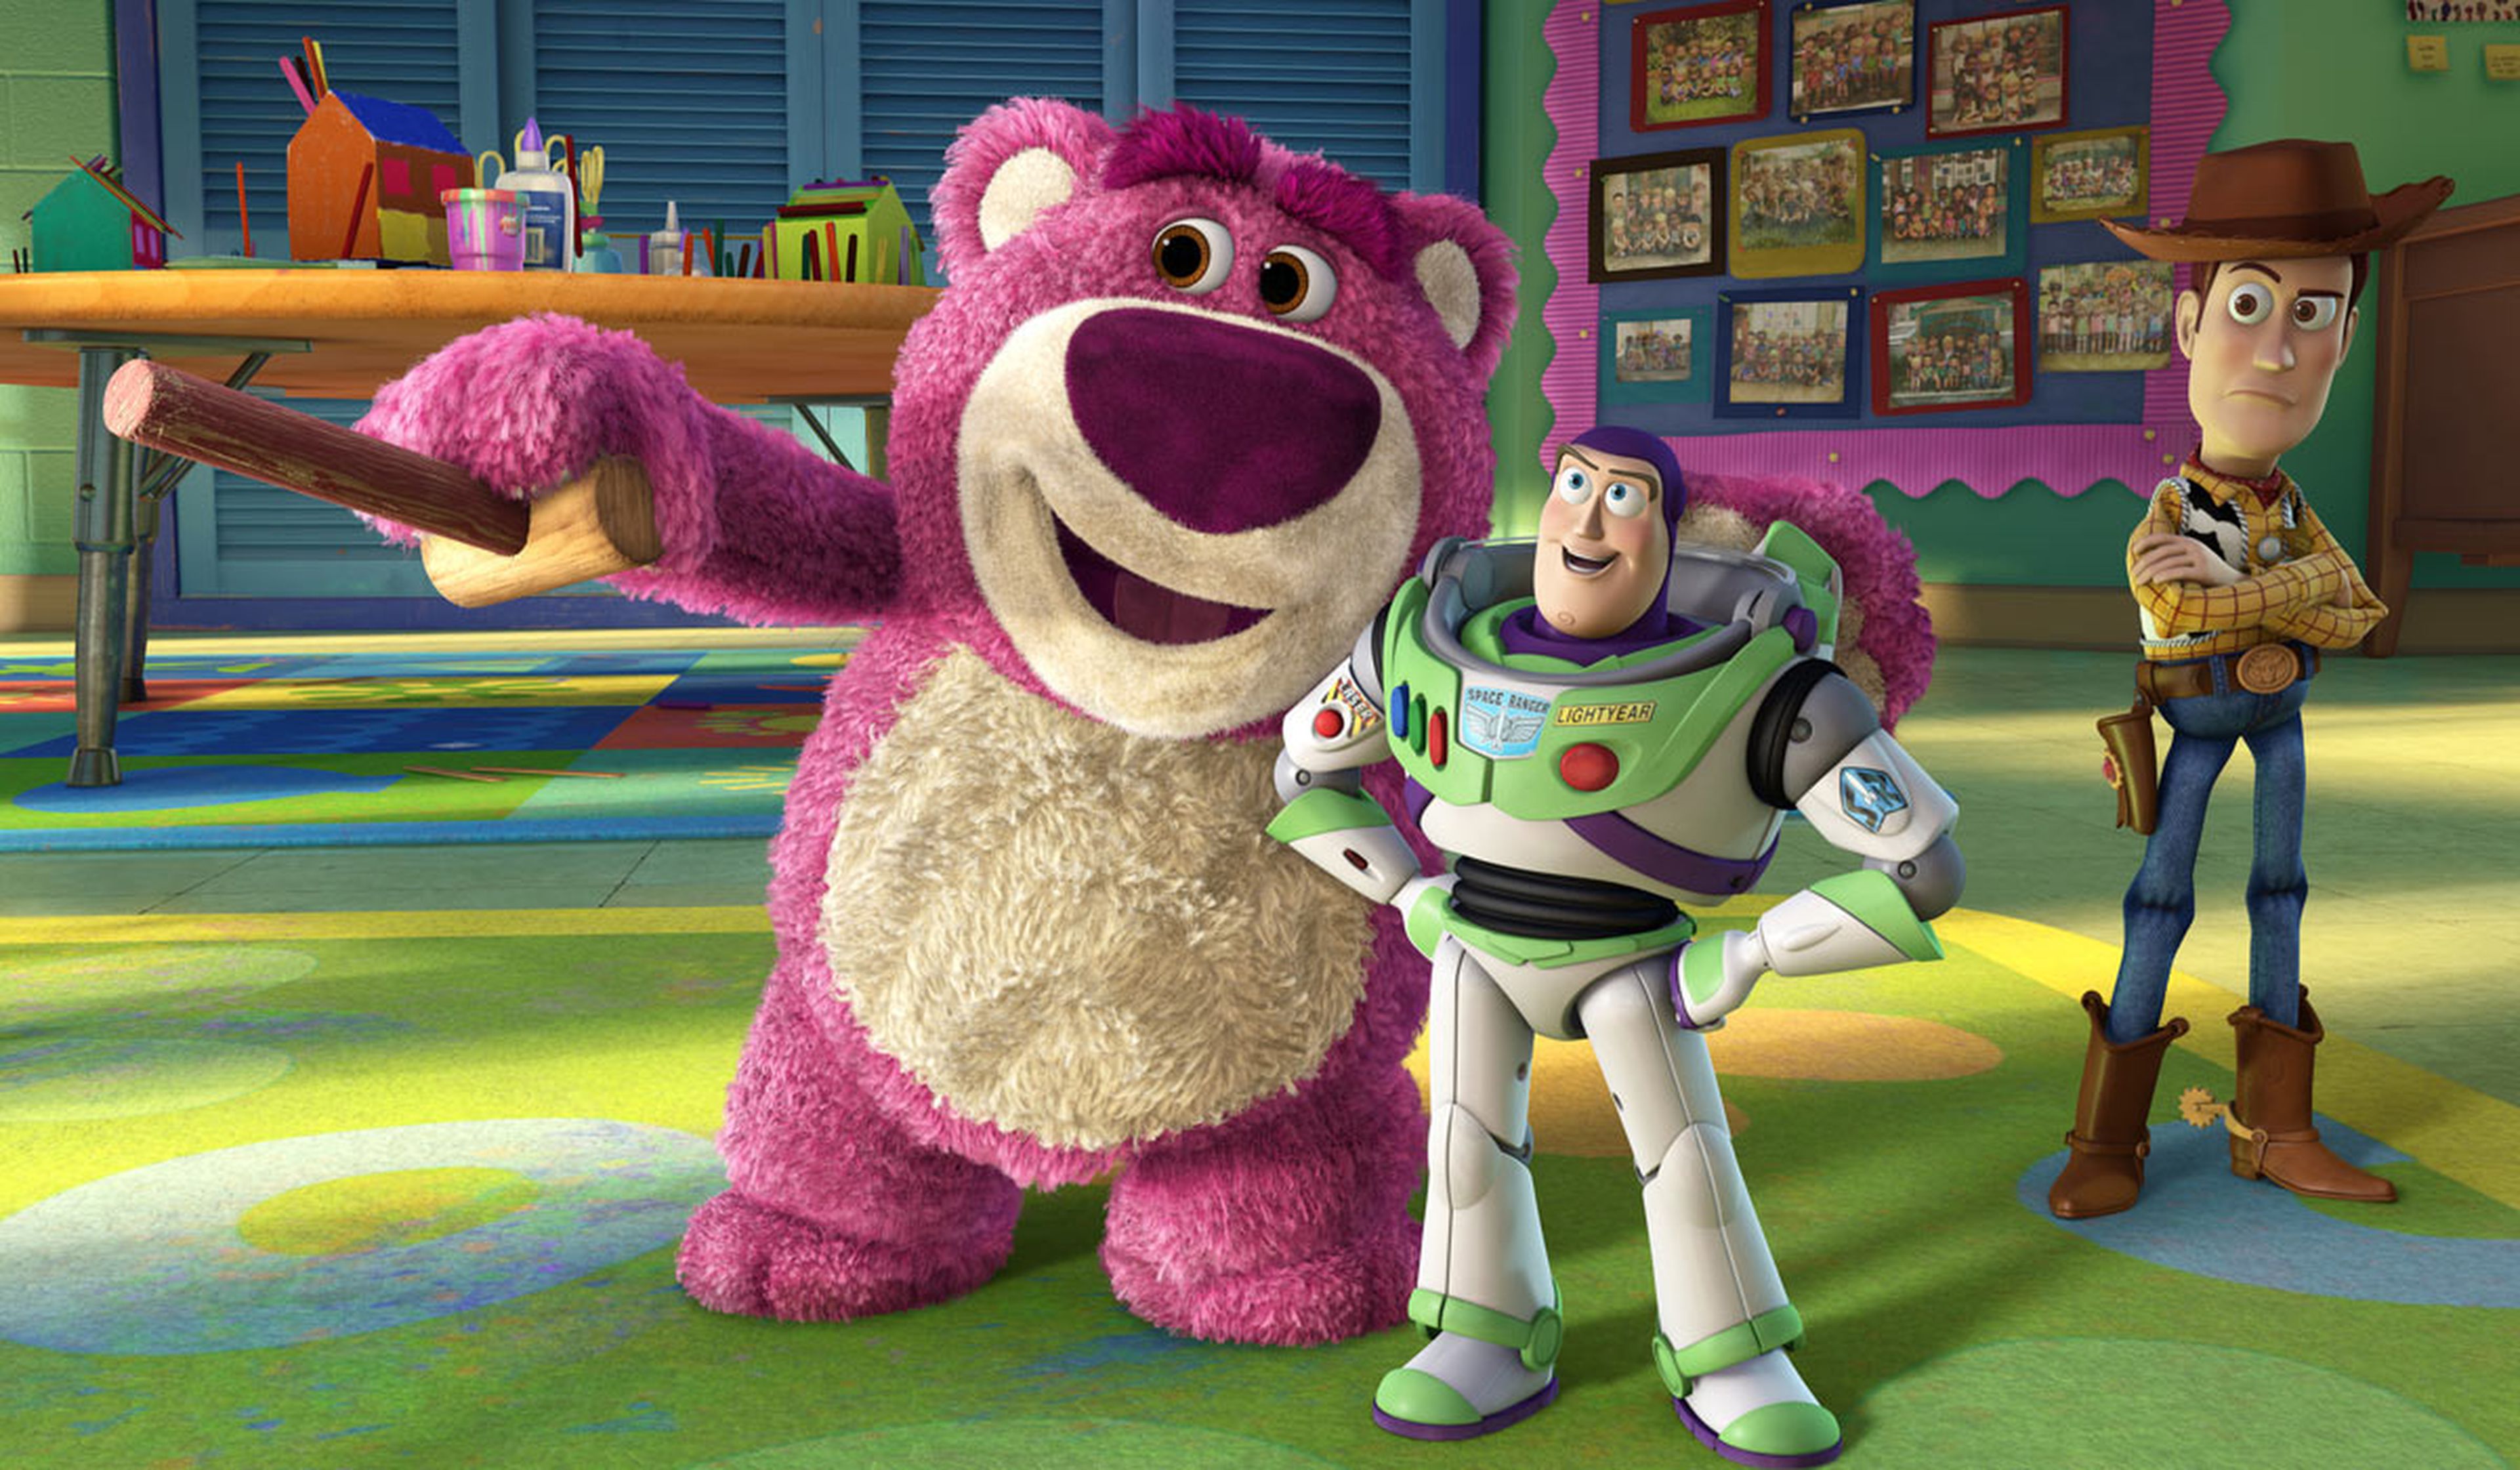 2010 - Toy Story 3